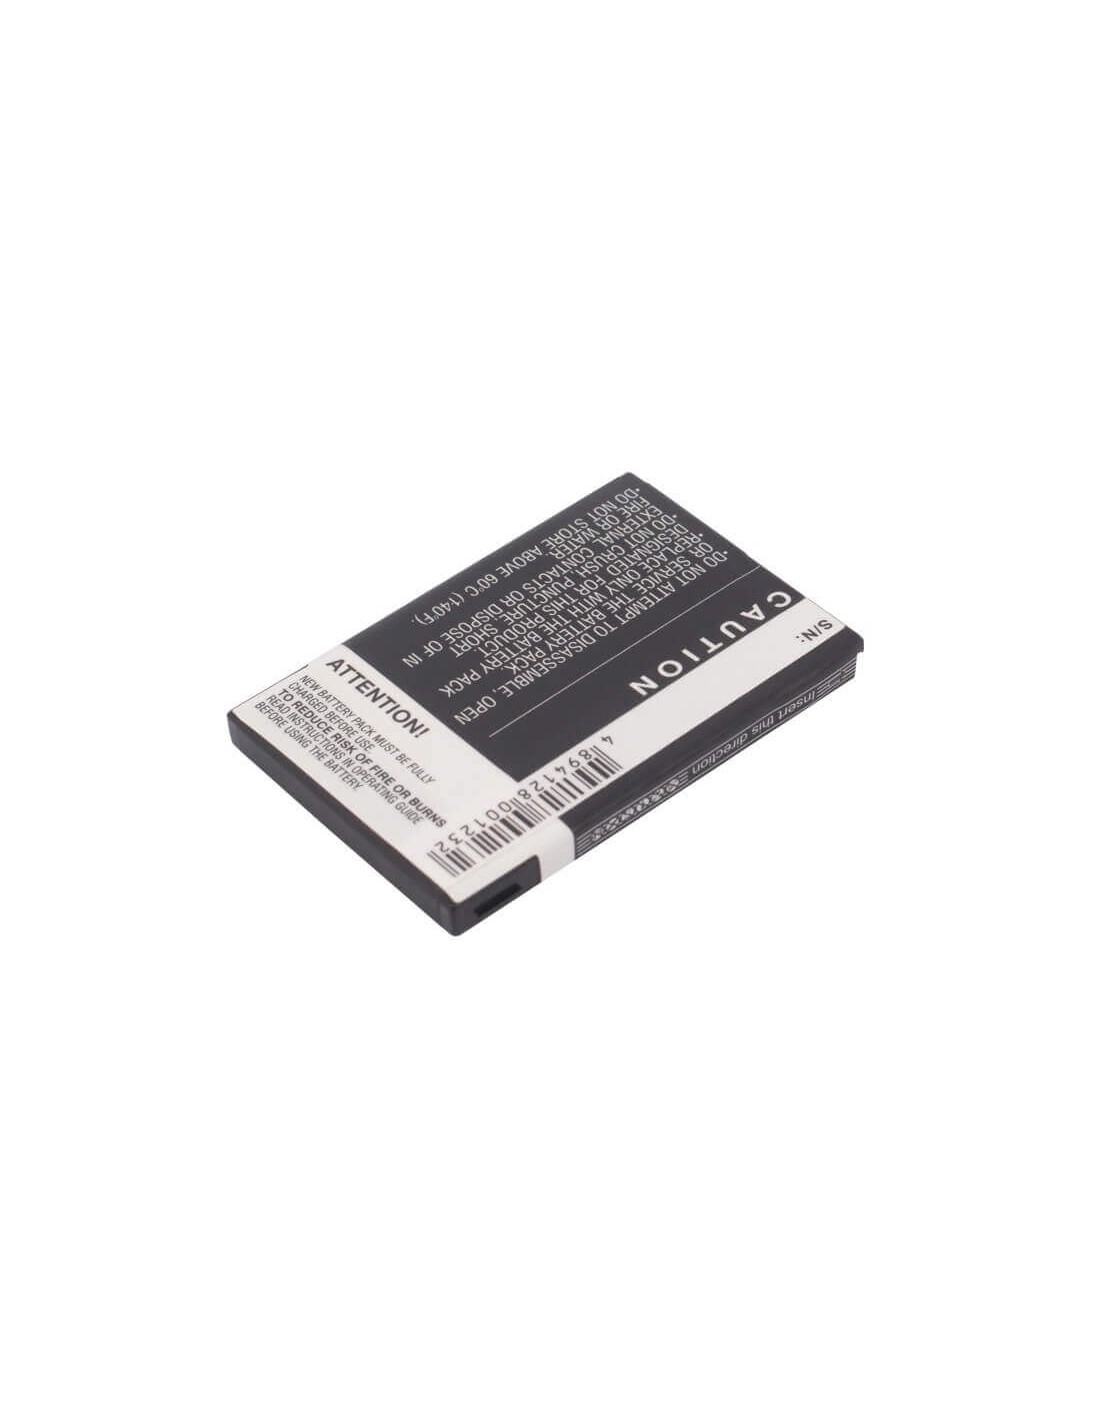 Battery for HTC S620, S621, Excalibur 3.7V, 1050mAh - 3.89Wh